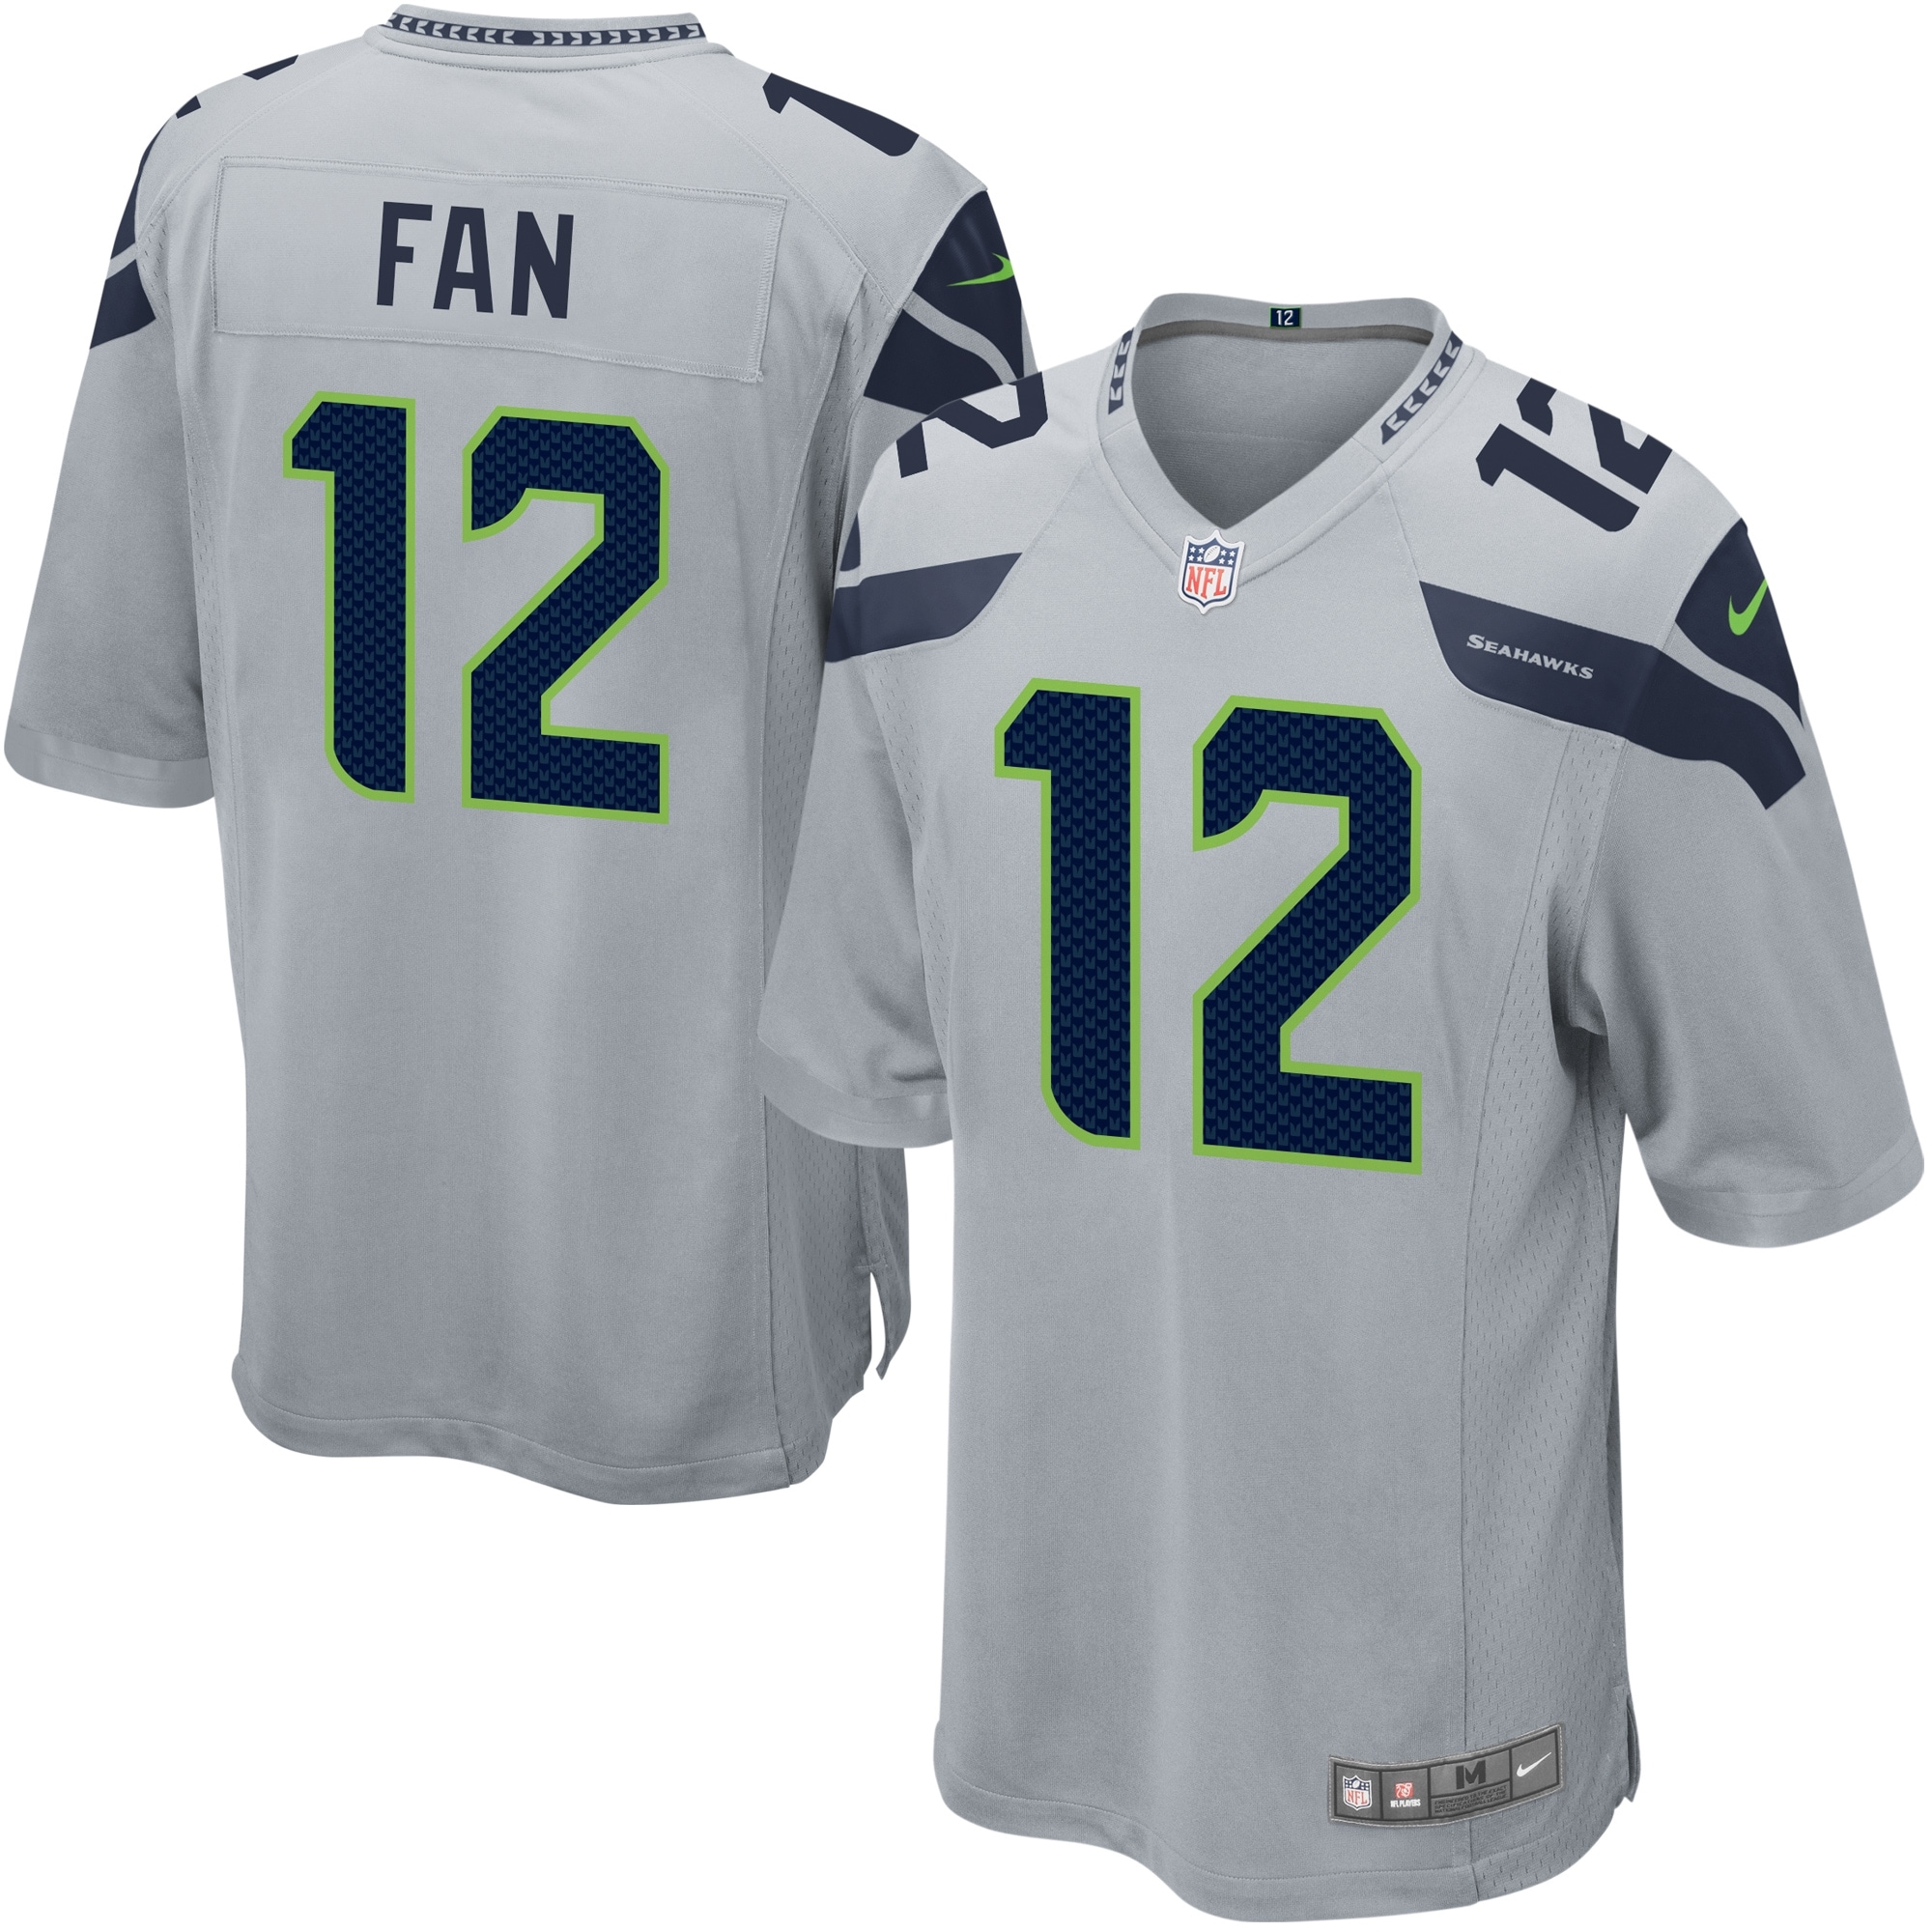 grey and black seahawks jersey